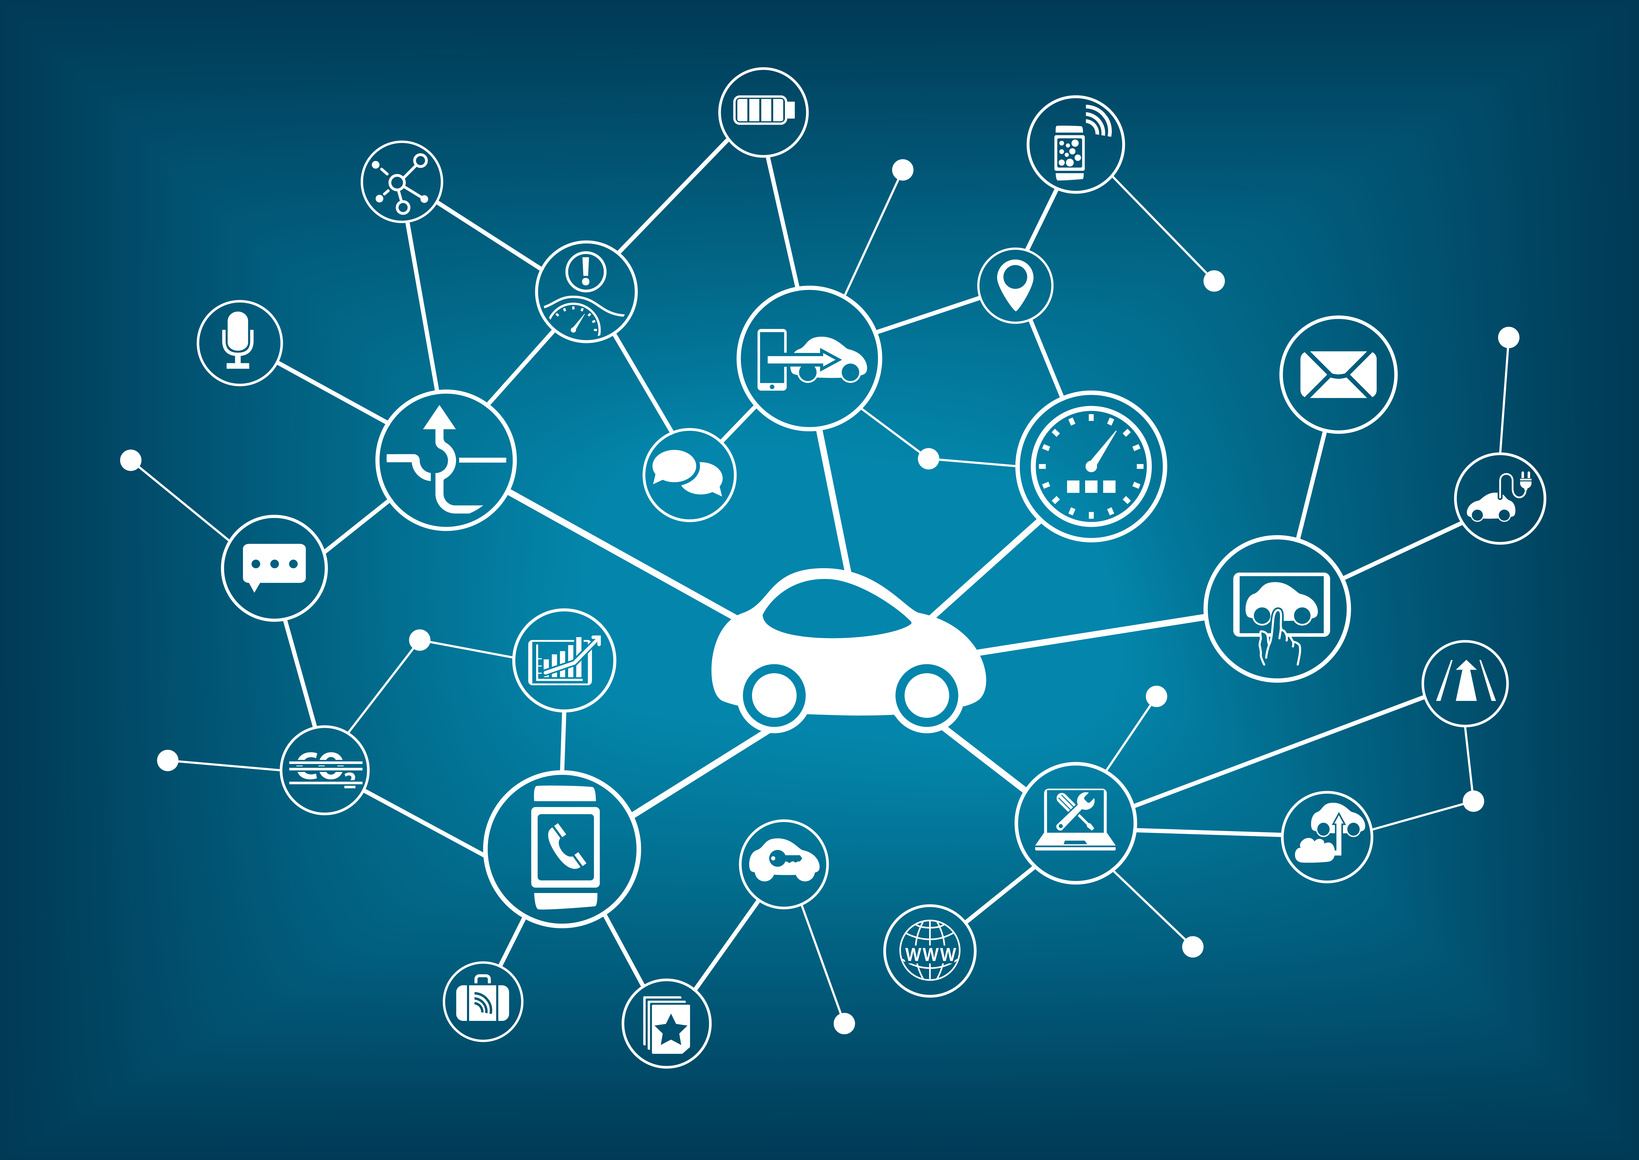 Connected cars have reached critical mass, says IDC